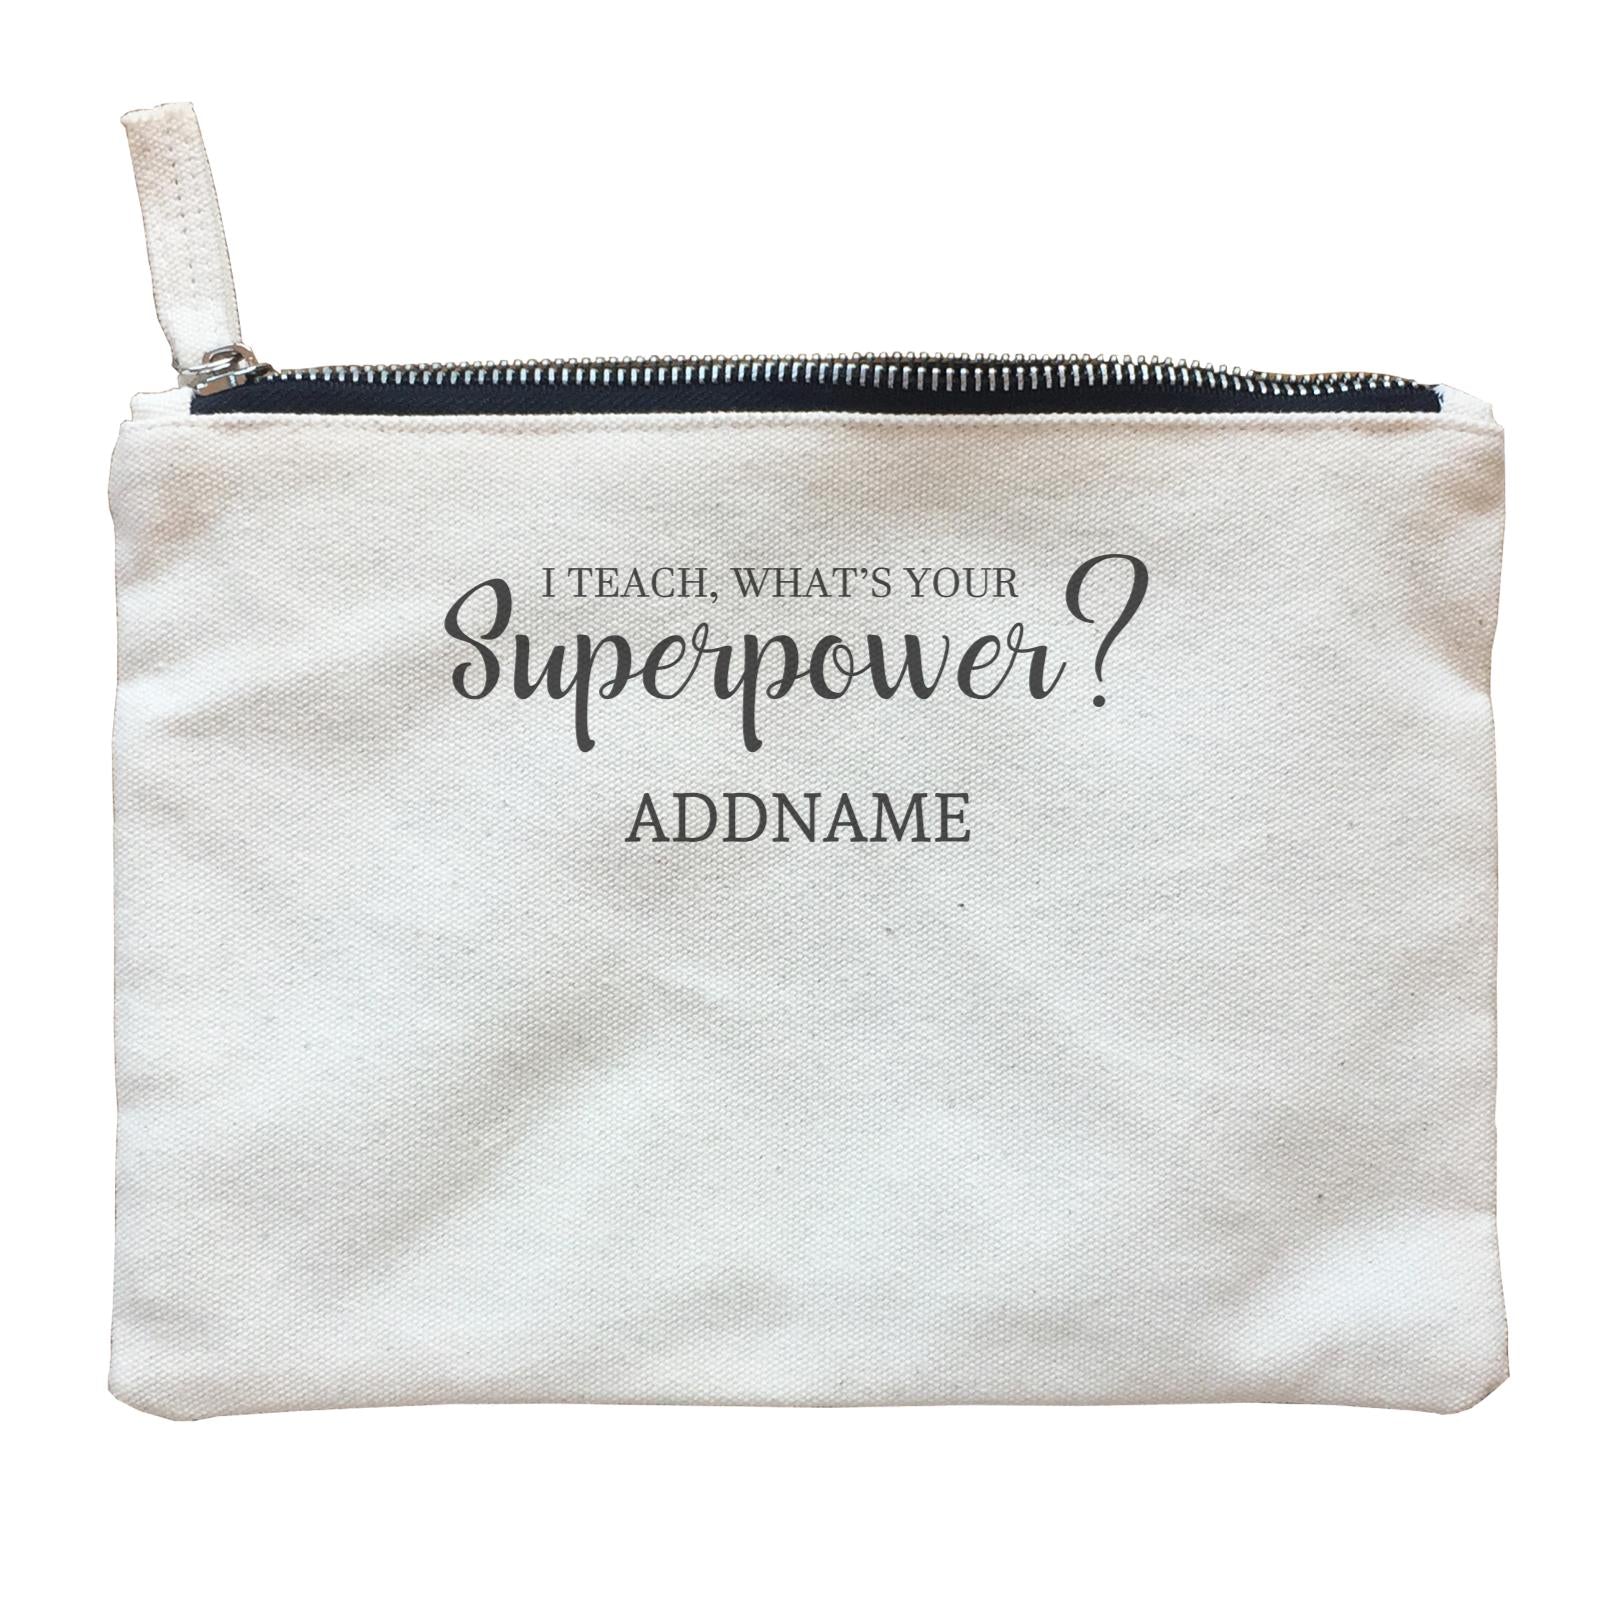 Super Teachers I Teach What's Your Superpower Addname Zipper Pouch